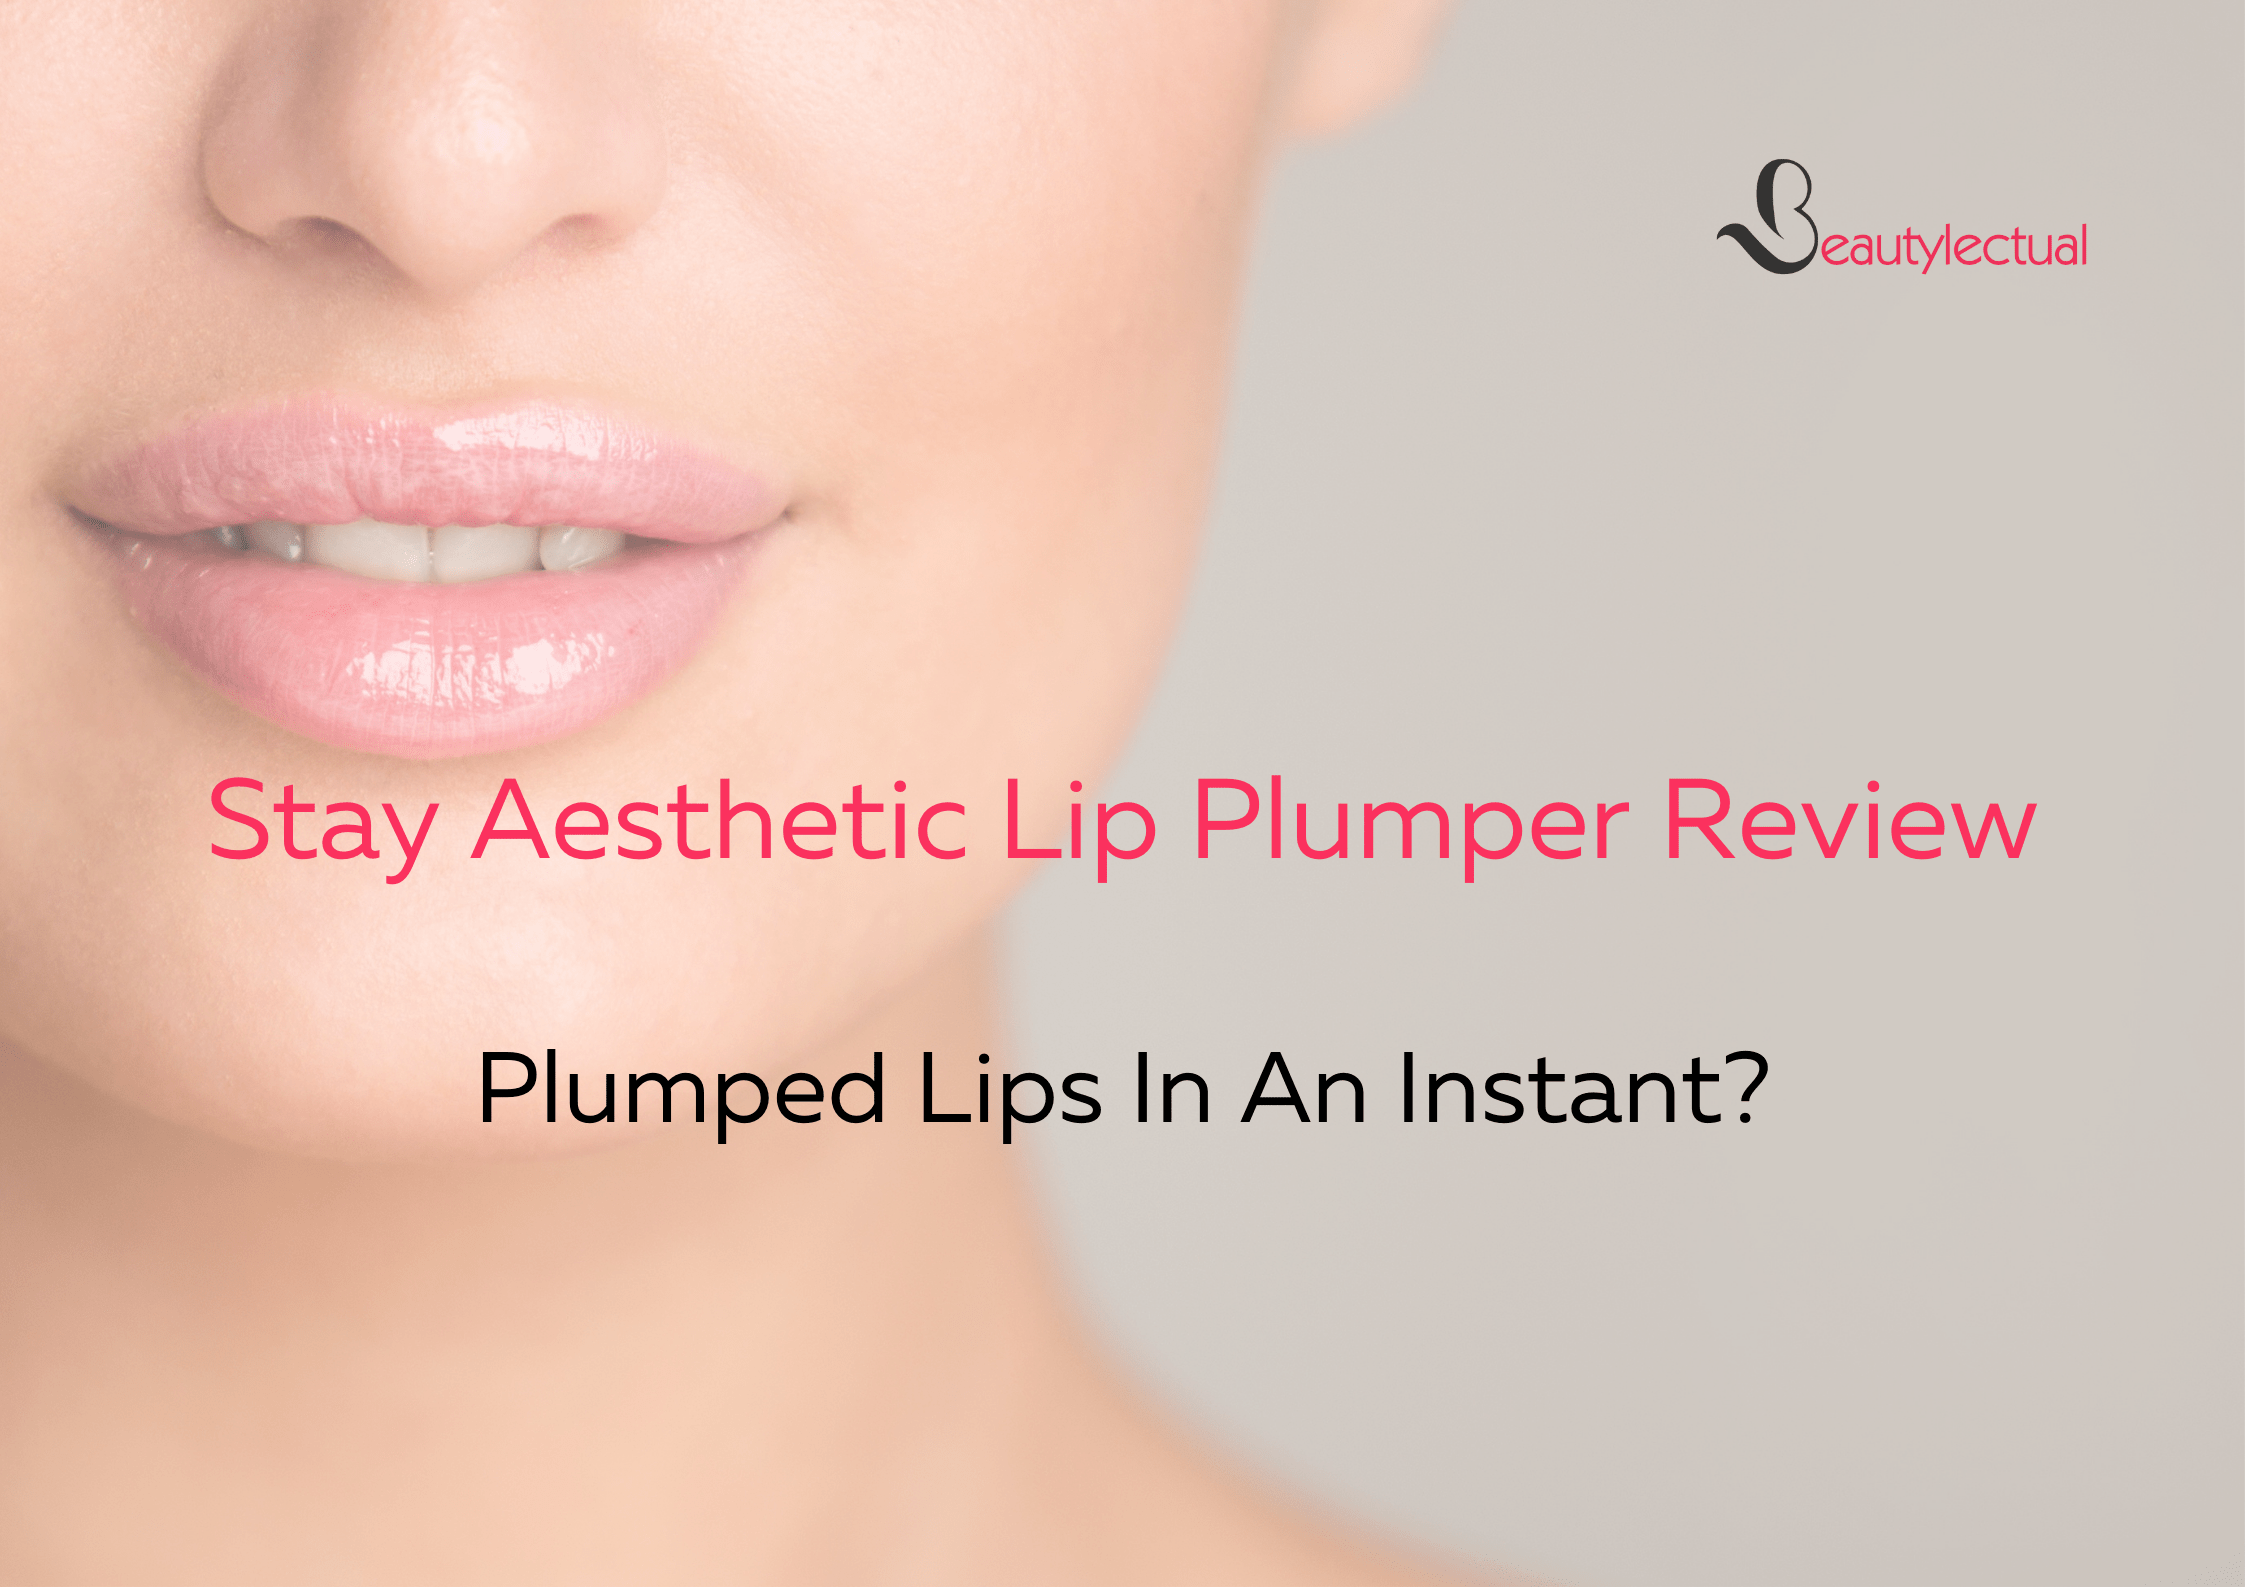 Stay Aesthetic Lip Plumper Review